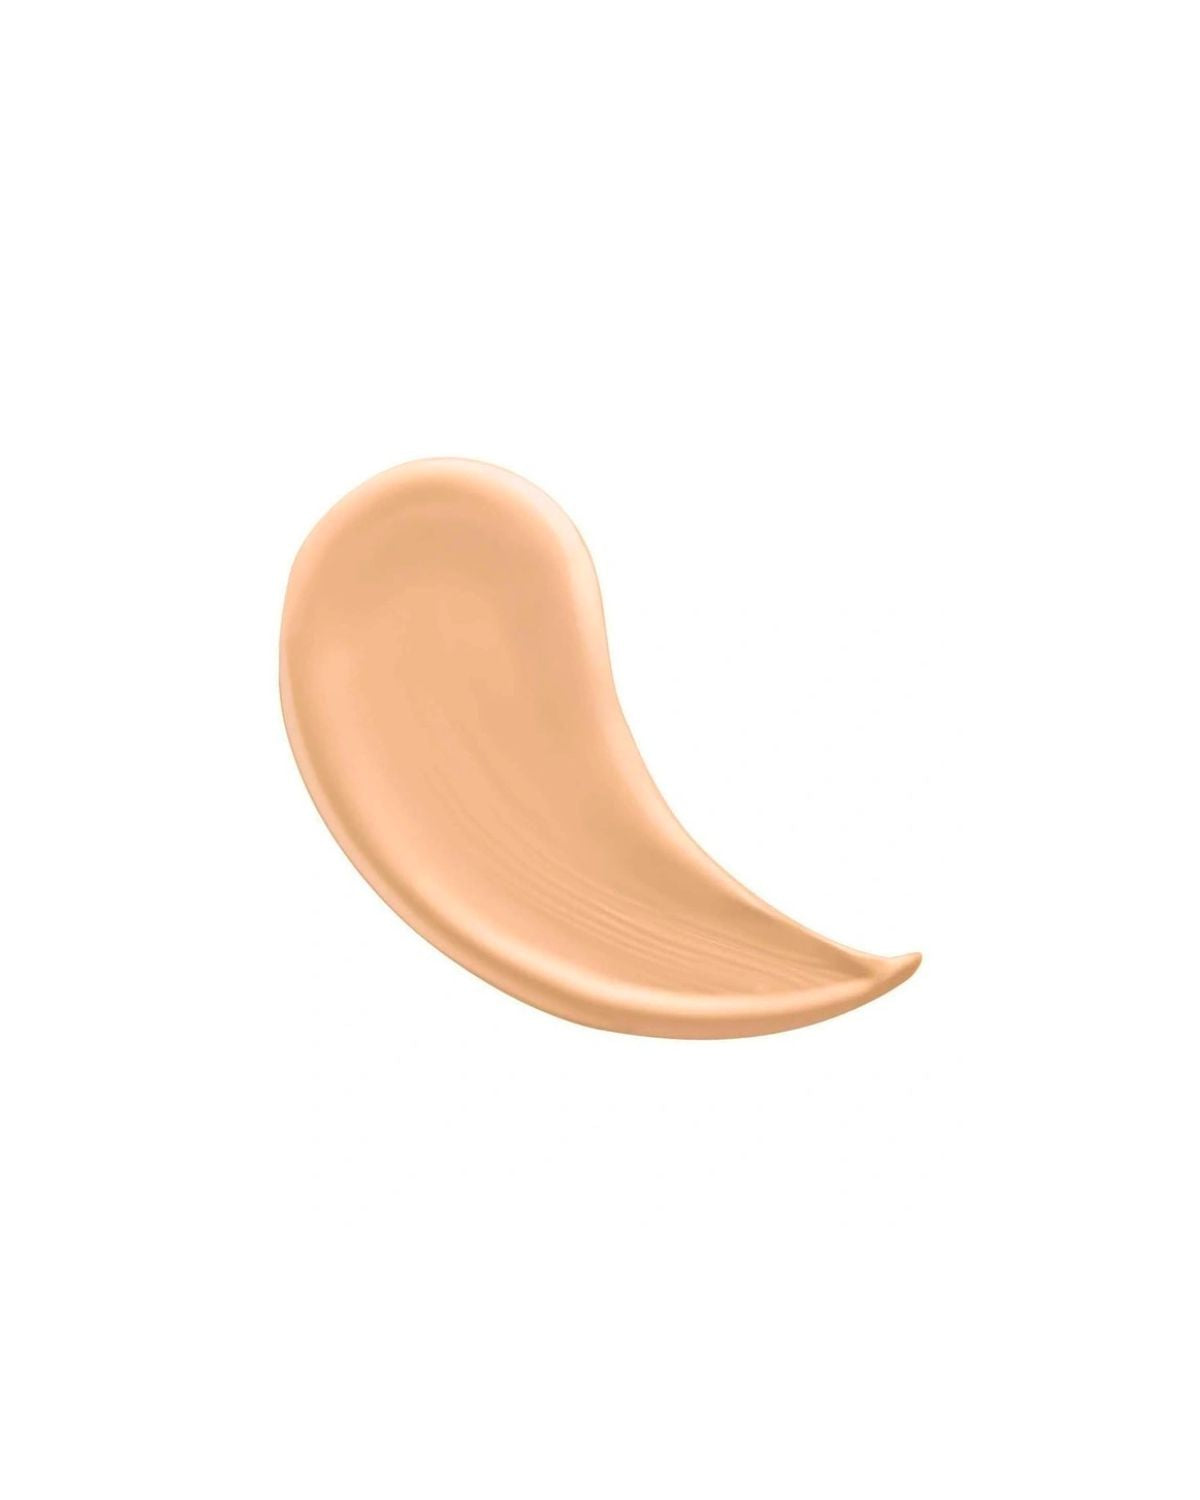 Absolue Smoothing Cushion Compact Foundation